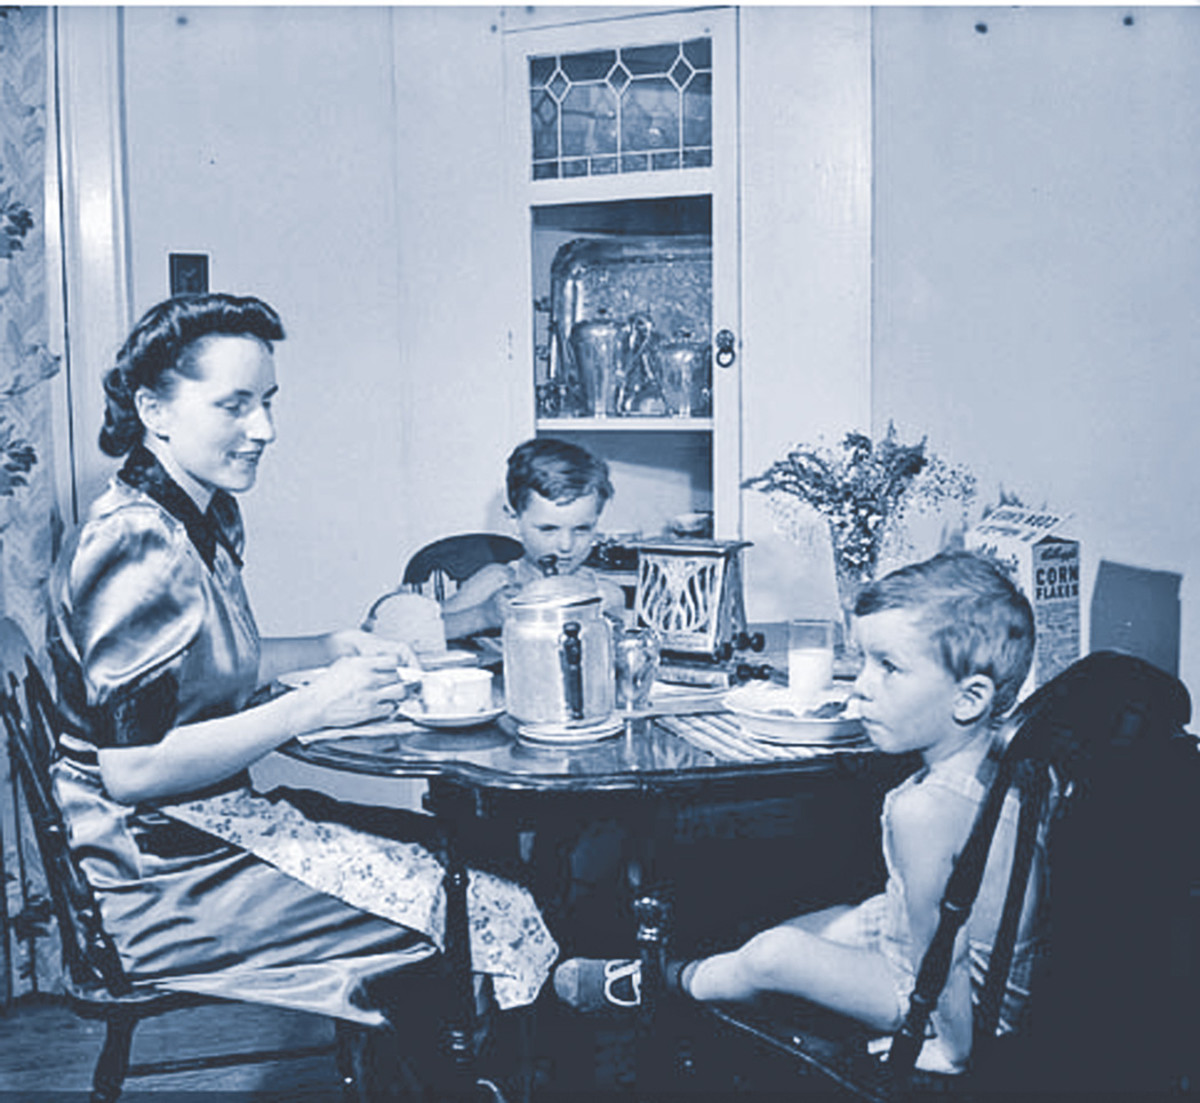 By the later war years posters, such as Mrs. Jack Wright and her two sons Ralph and David eating breakfast replaced the Bren Gun Girl campaign.